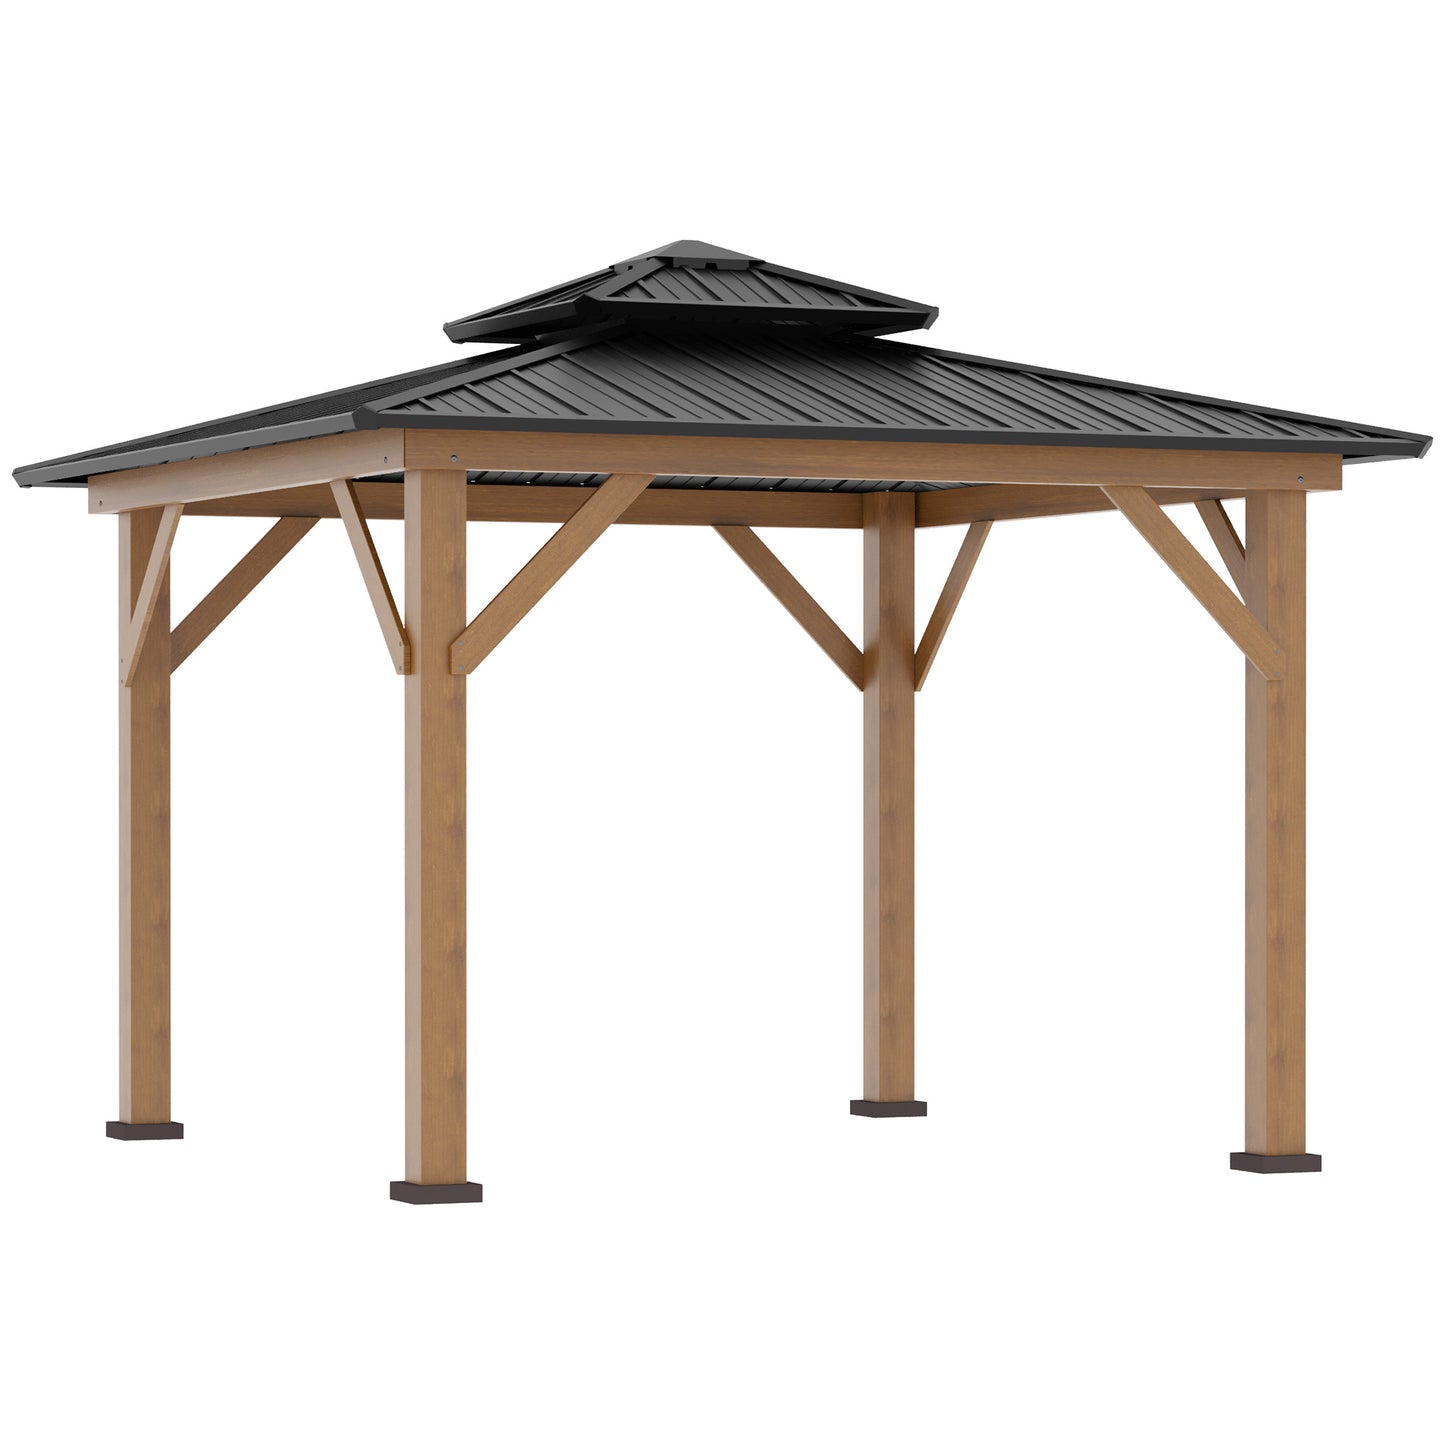 3.5 x 3.5m Outdoor Aluminium Hardtop Gazebo Canopy with 2-Tier Roof and Solid Wood Frame Outdoor Patio Shelter for Patio, Garden, Grey